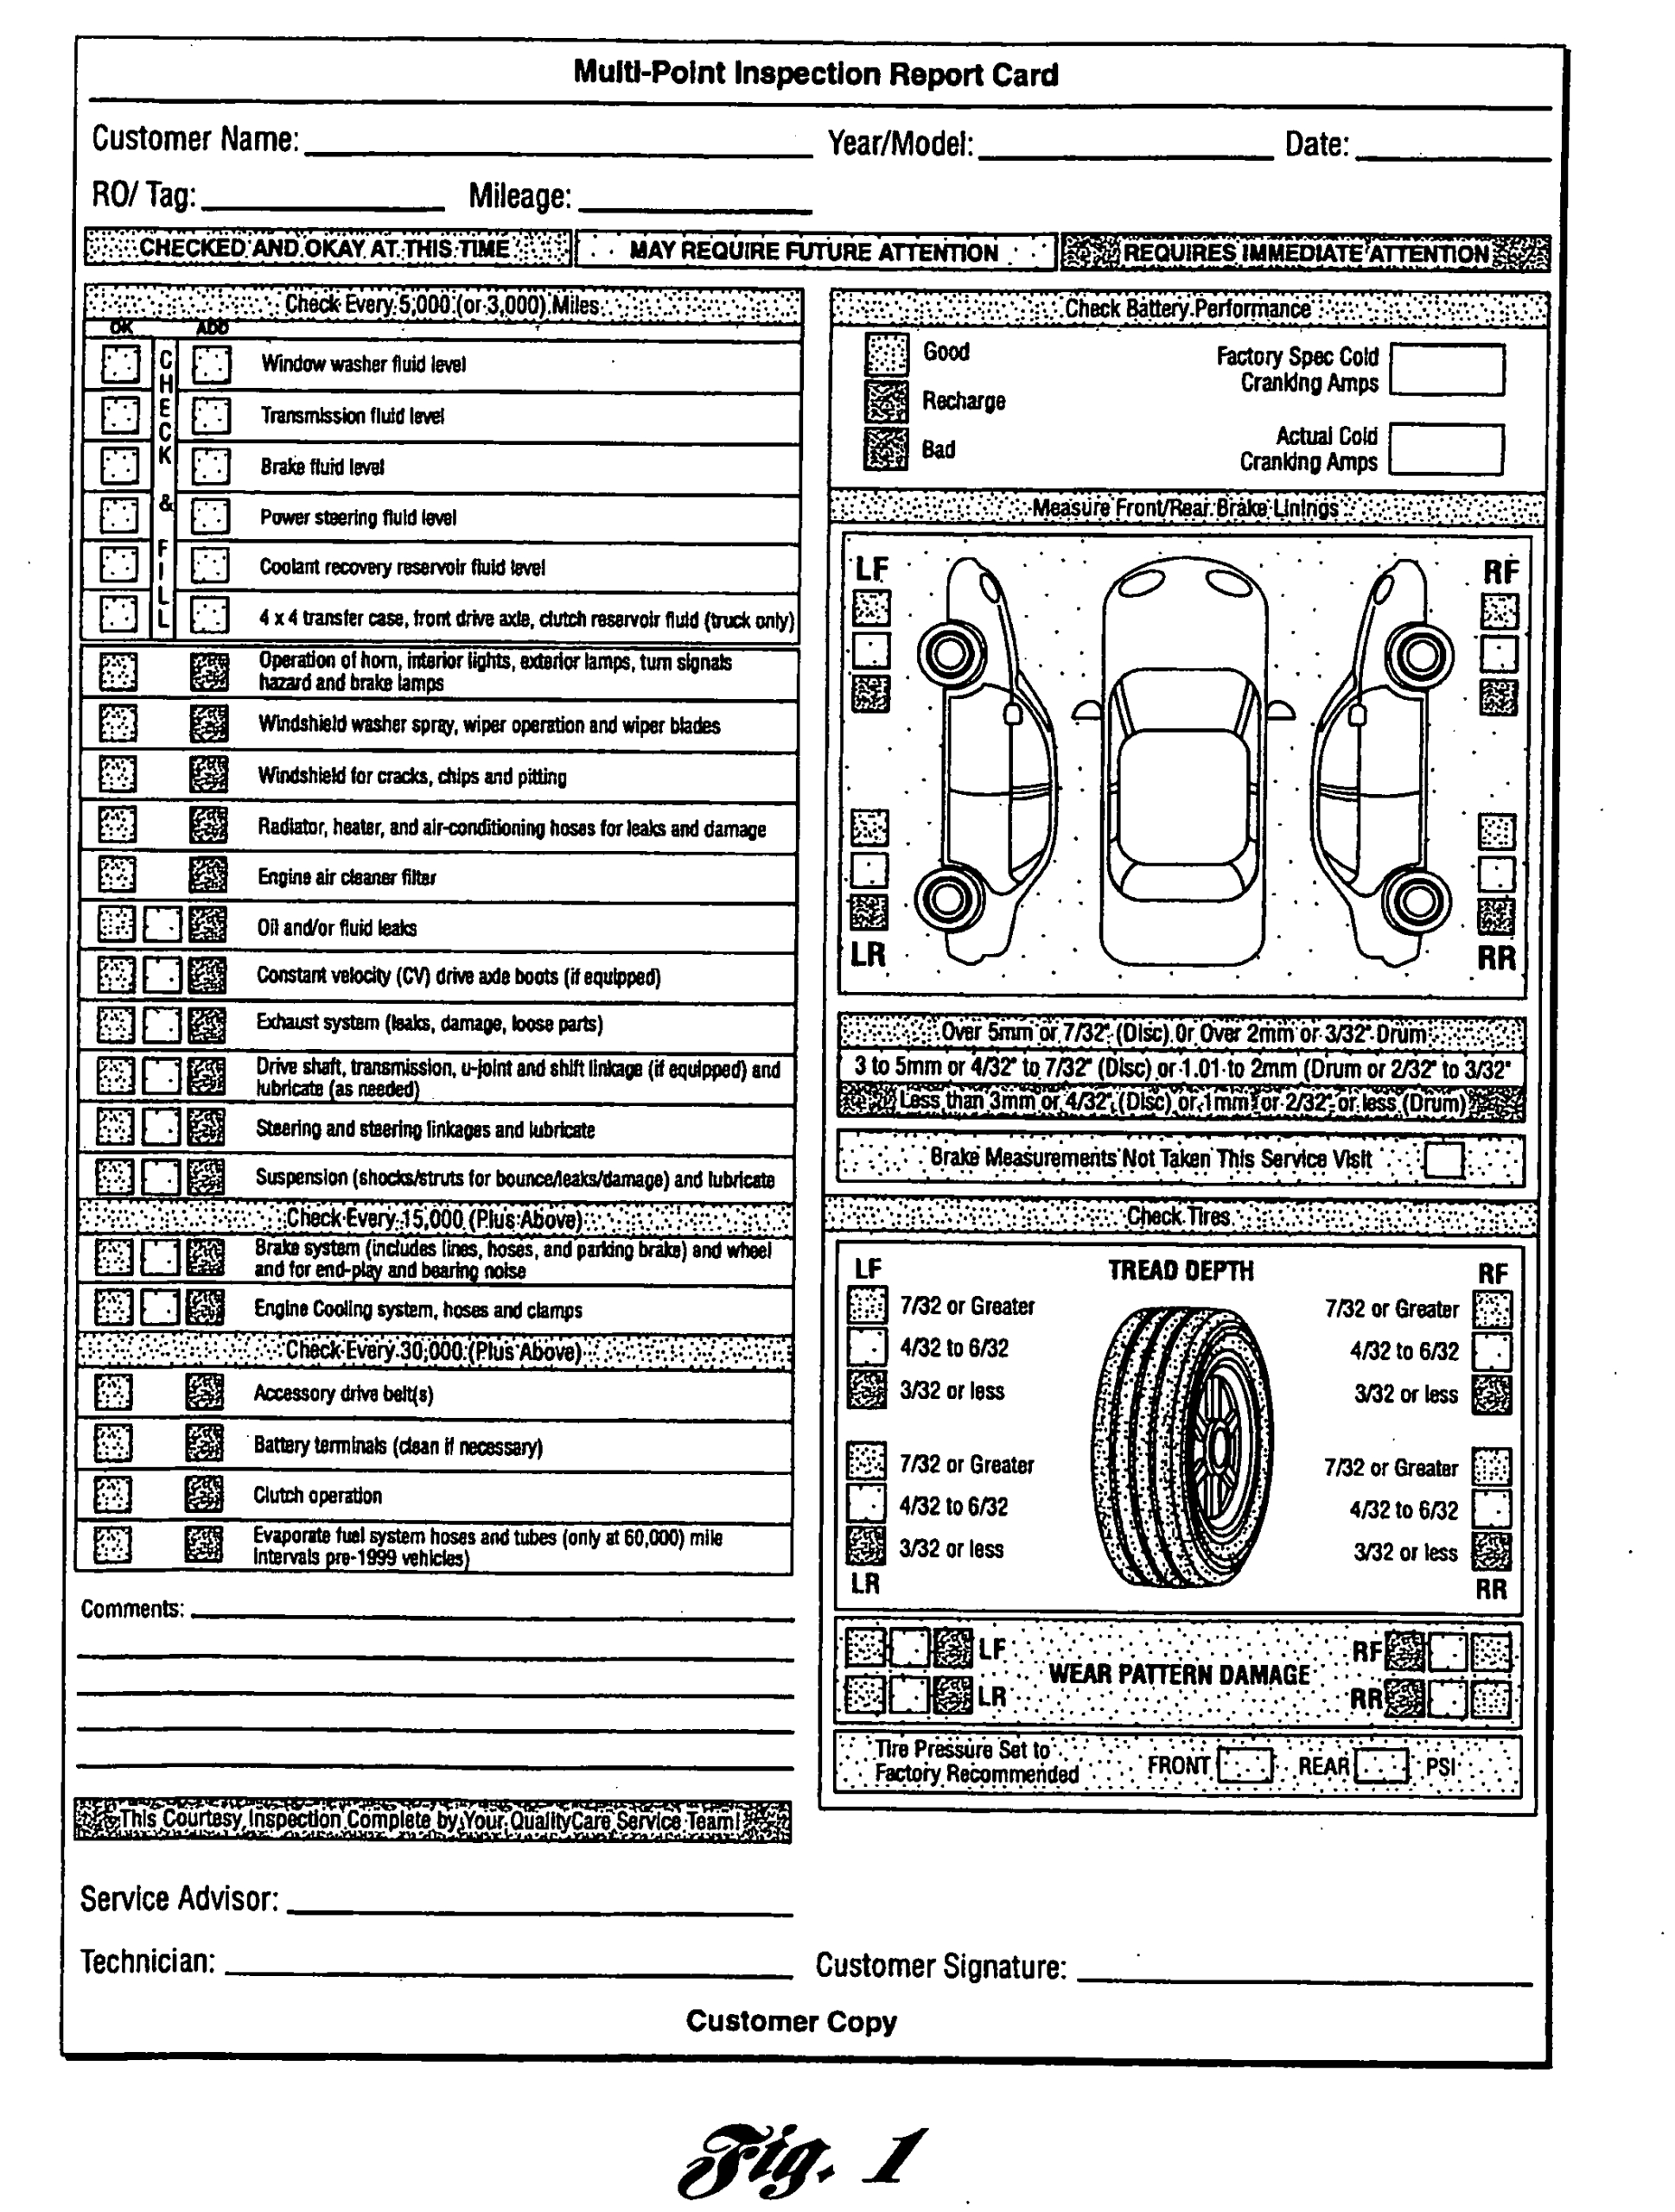 Multi Point Inspection Report Card As Recommendedford Throughout Truck Condition Report Template